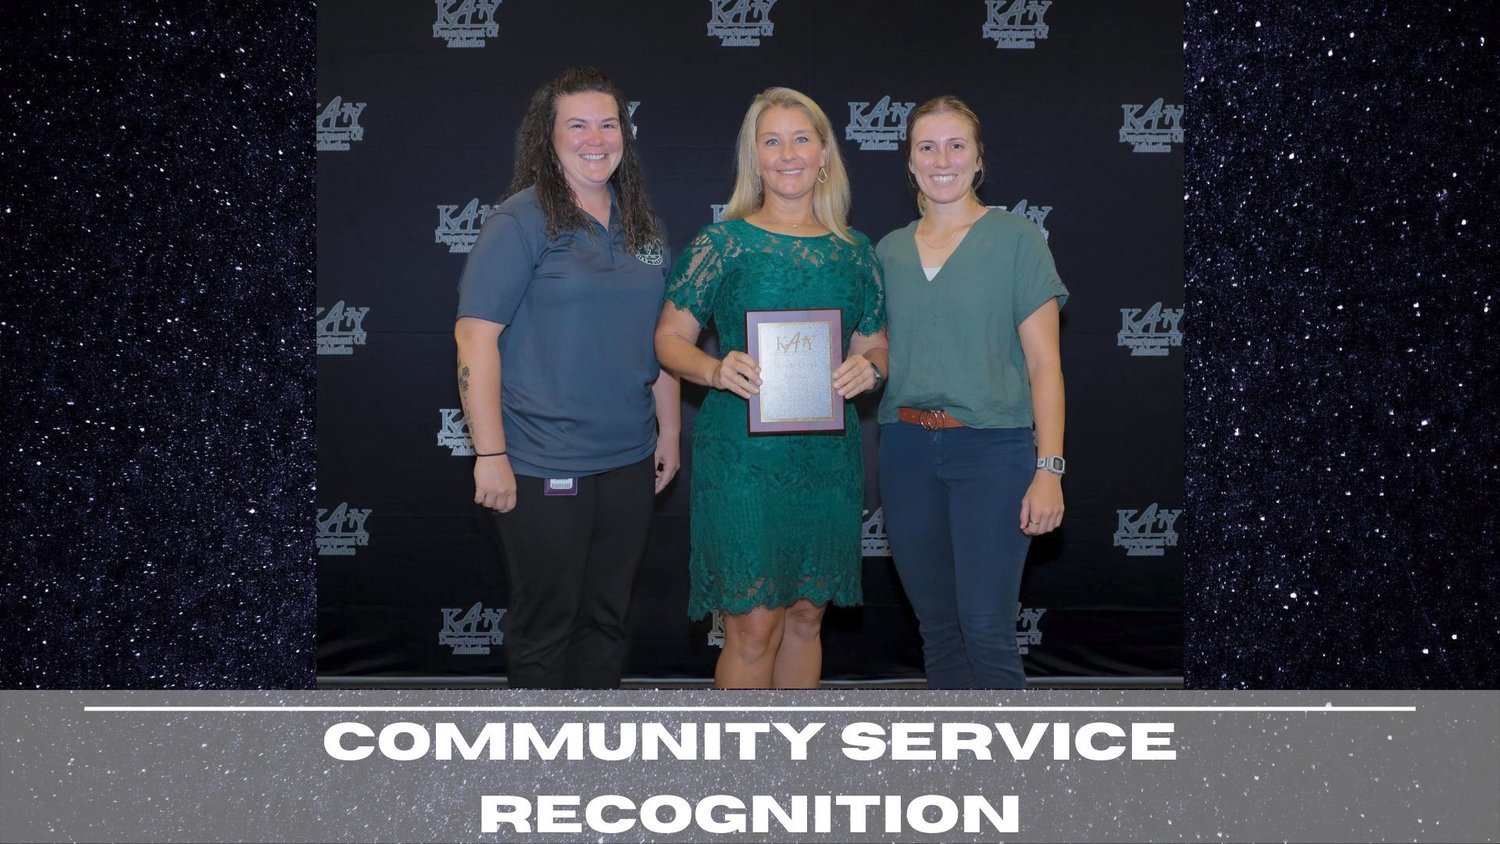 Mayde Creek’s softball team was awarded the Community Service Recognition award.